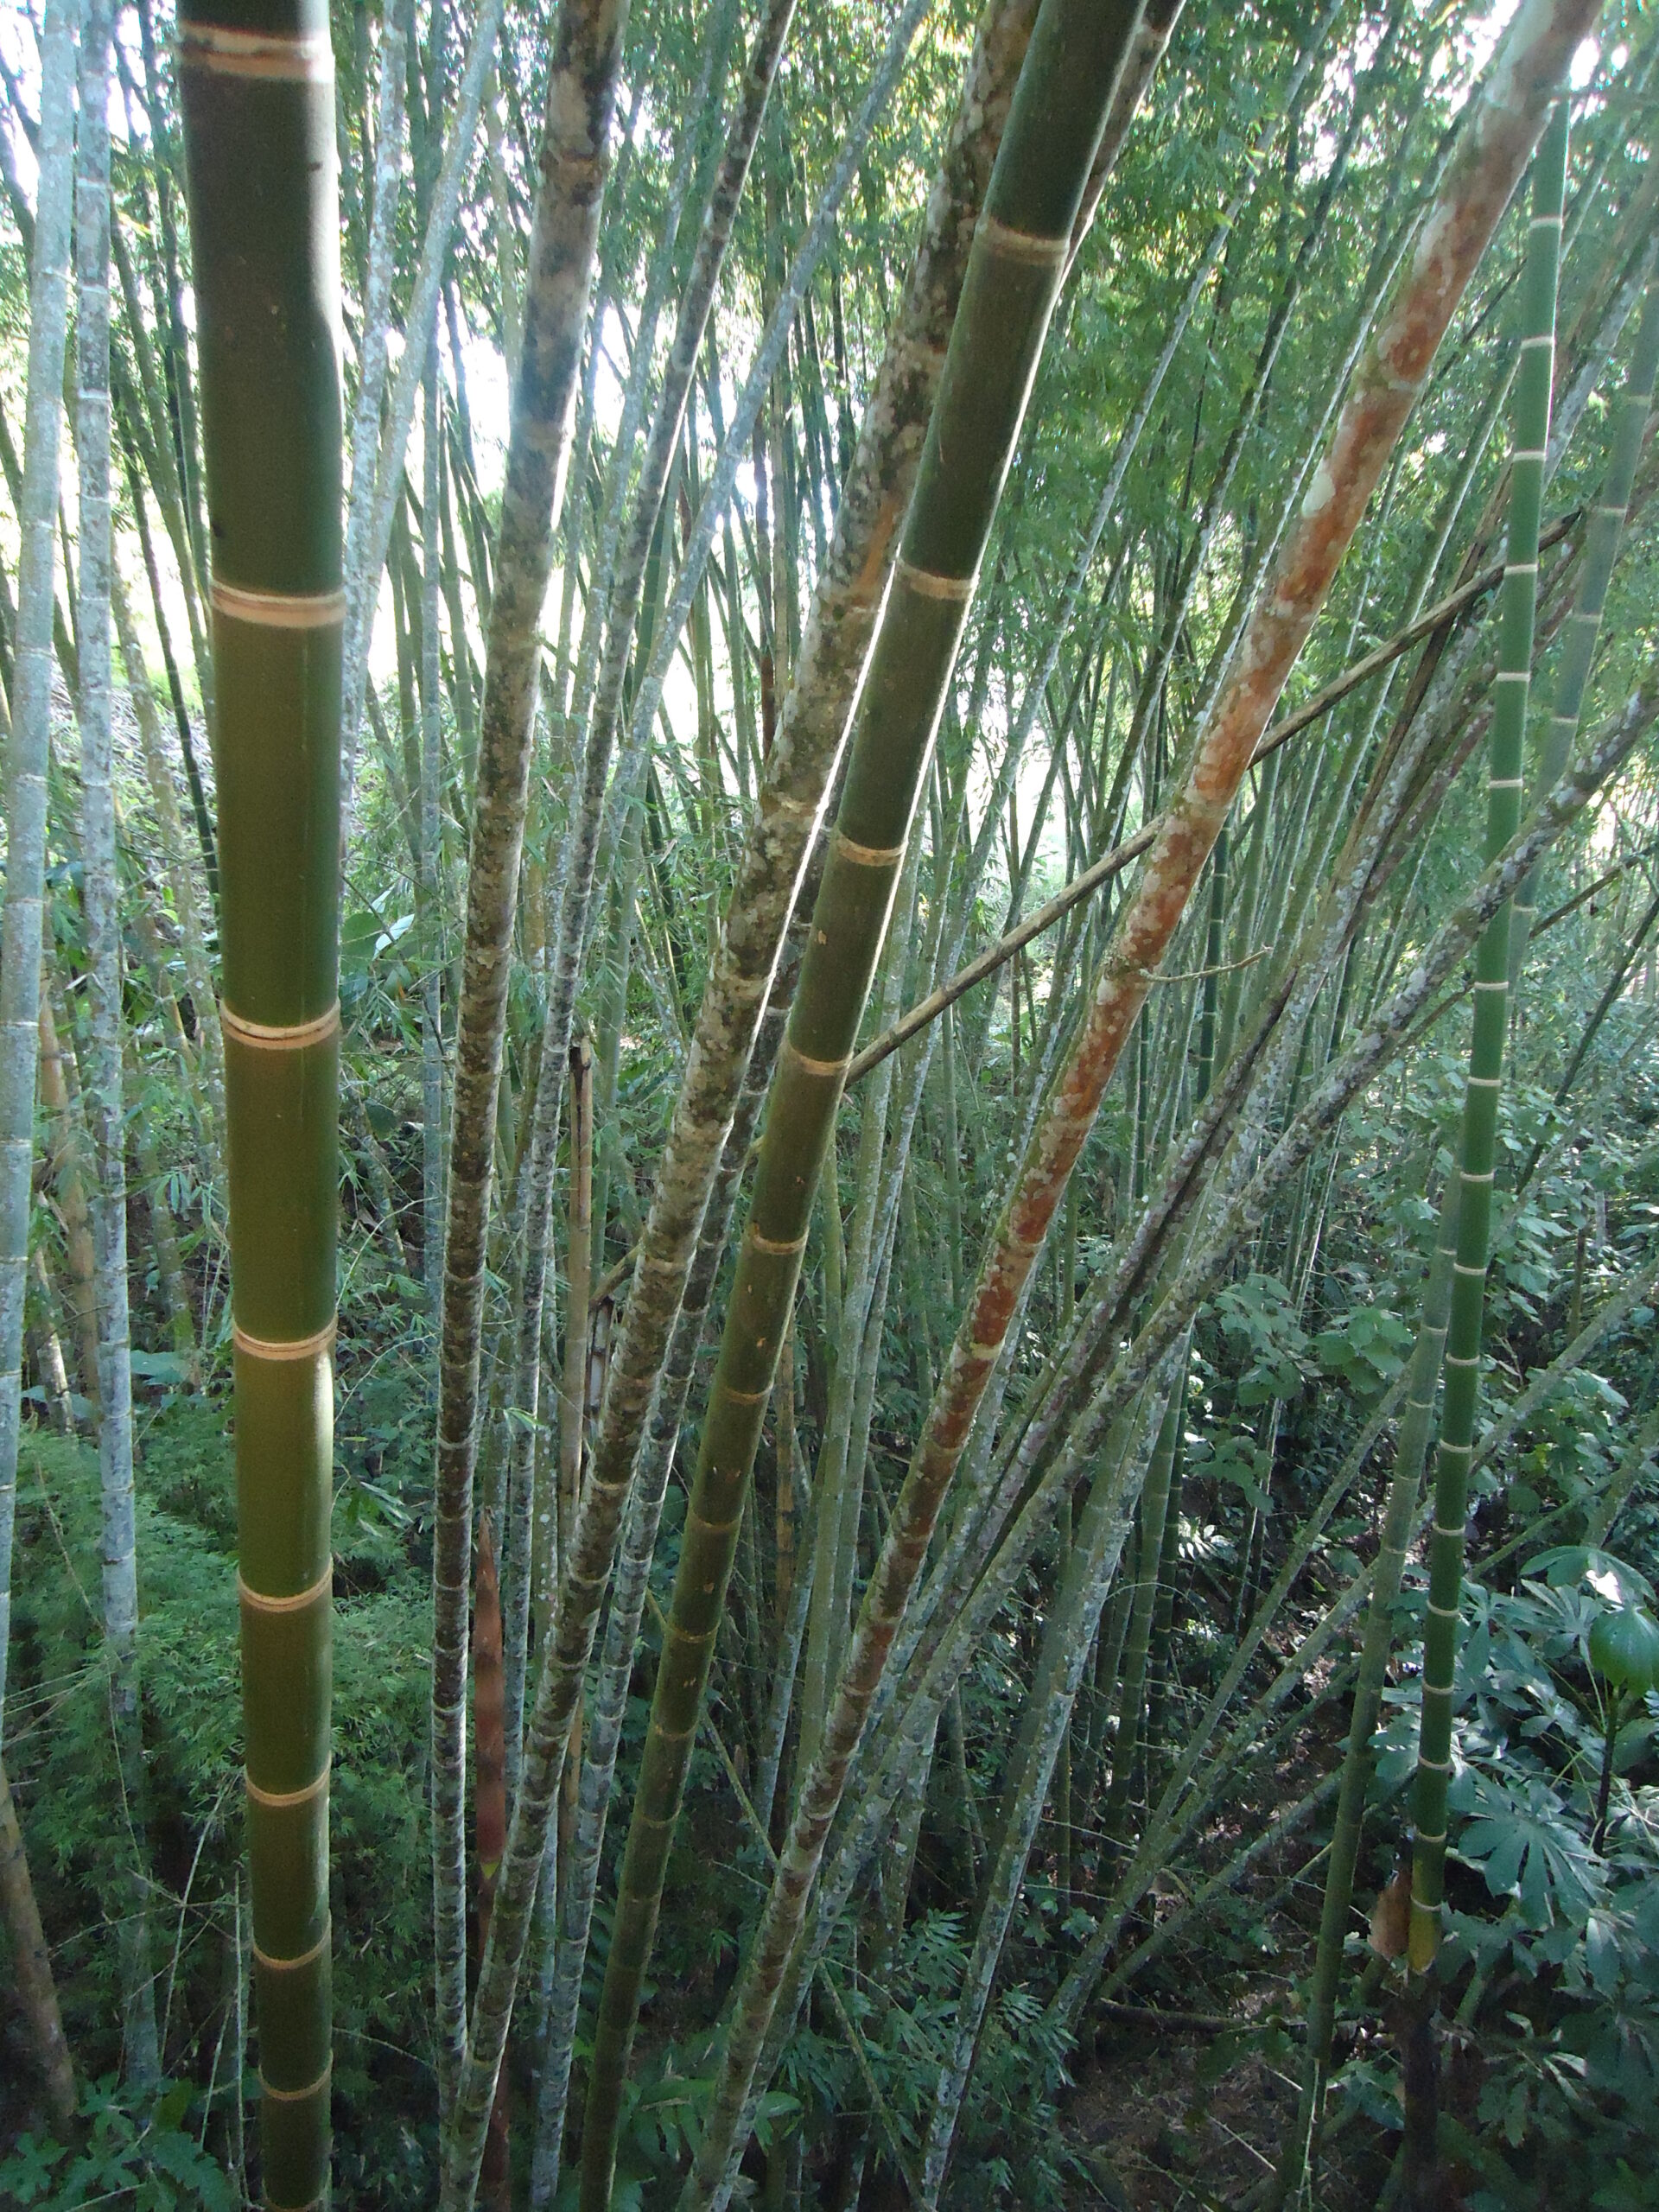 The speed at which bamboo grows, the height it can reach (over 90 feet), its extensive root system and its ability to regenerate quickly after harvest add up to large amounts of carbon storage above and below ground. JENNY NOBLE